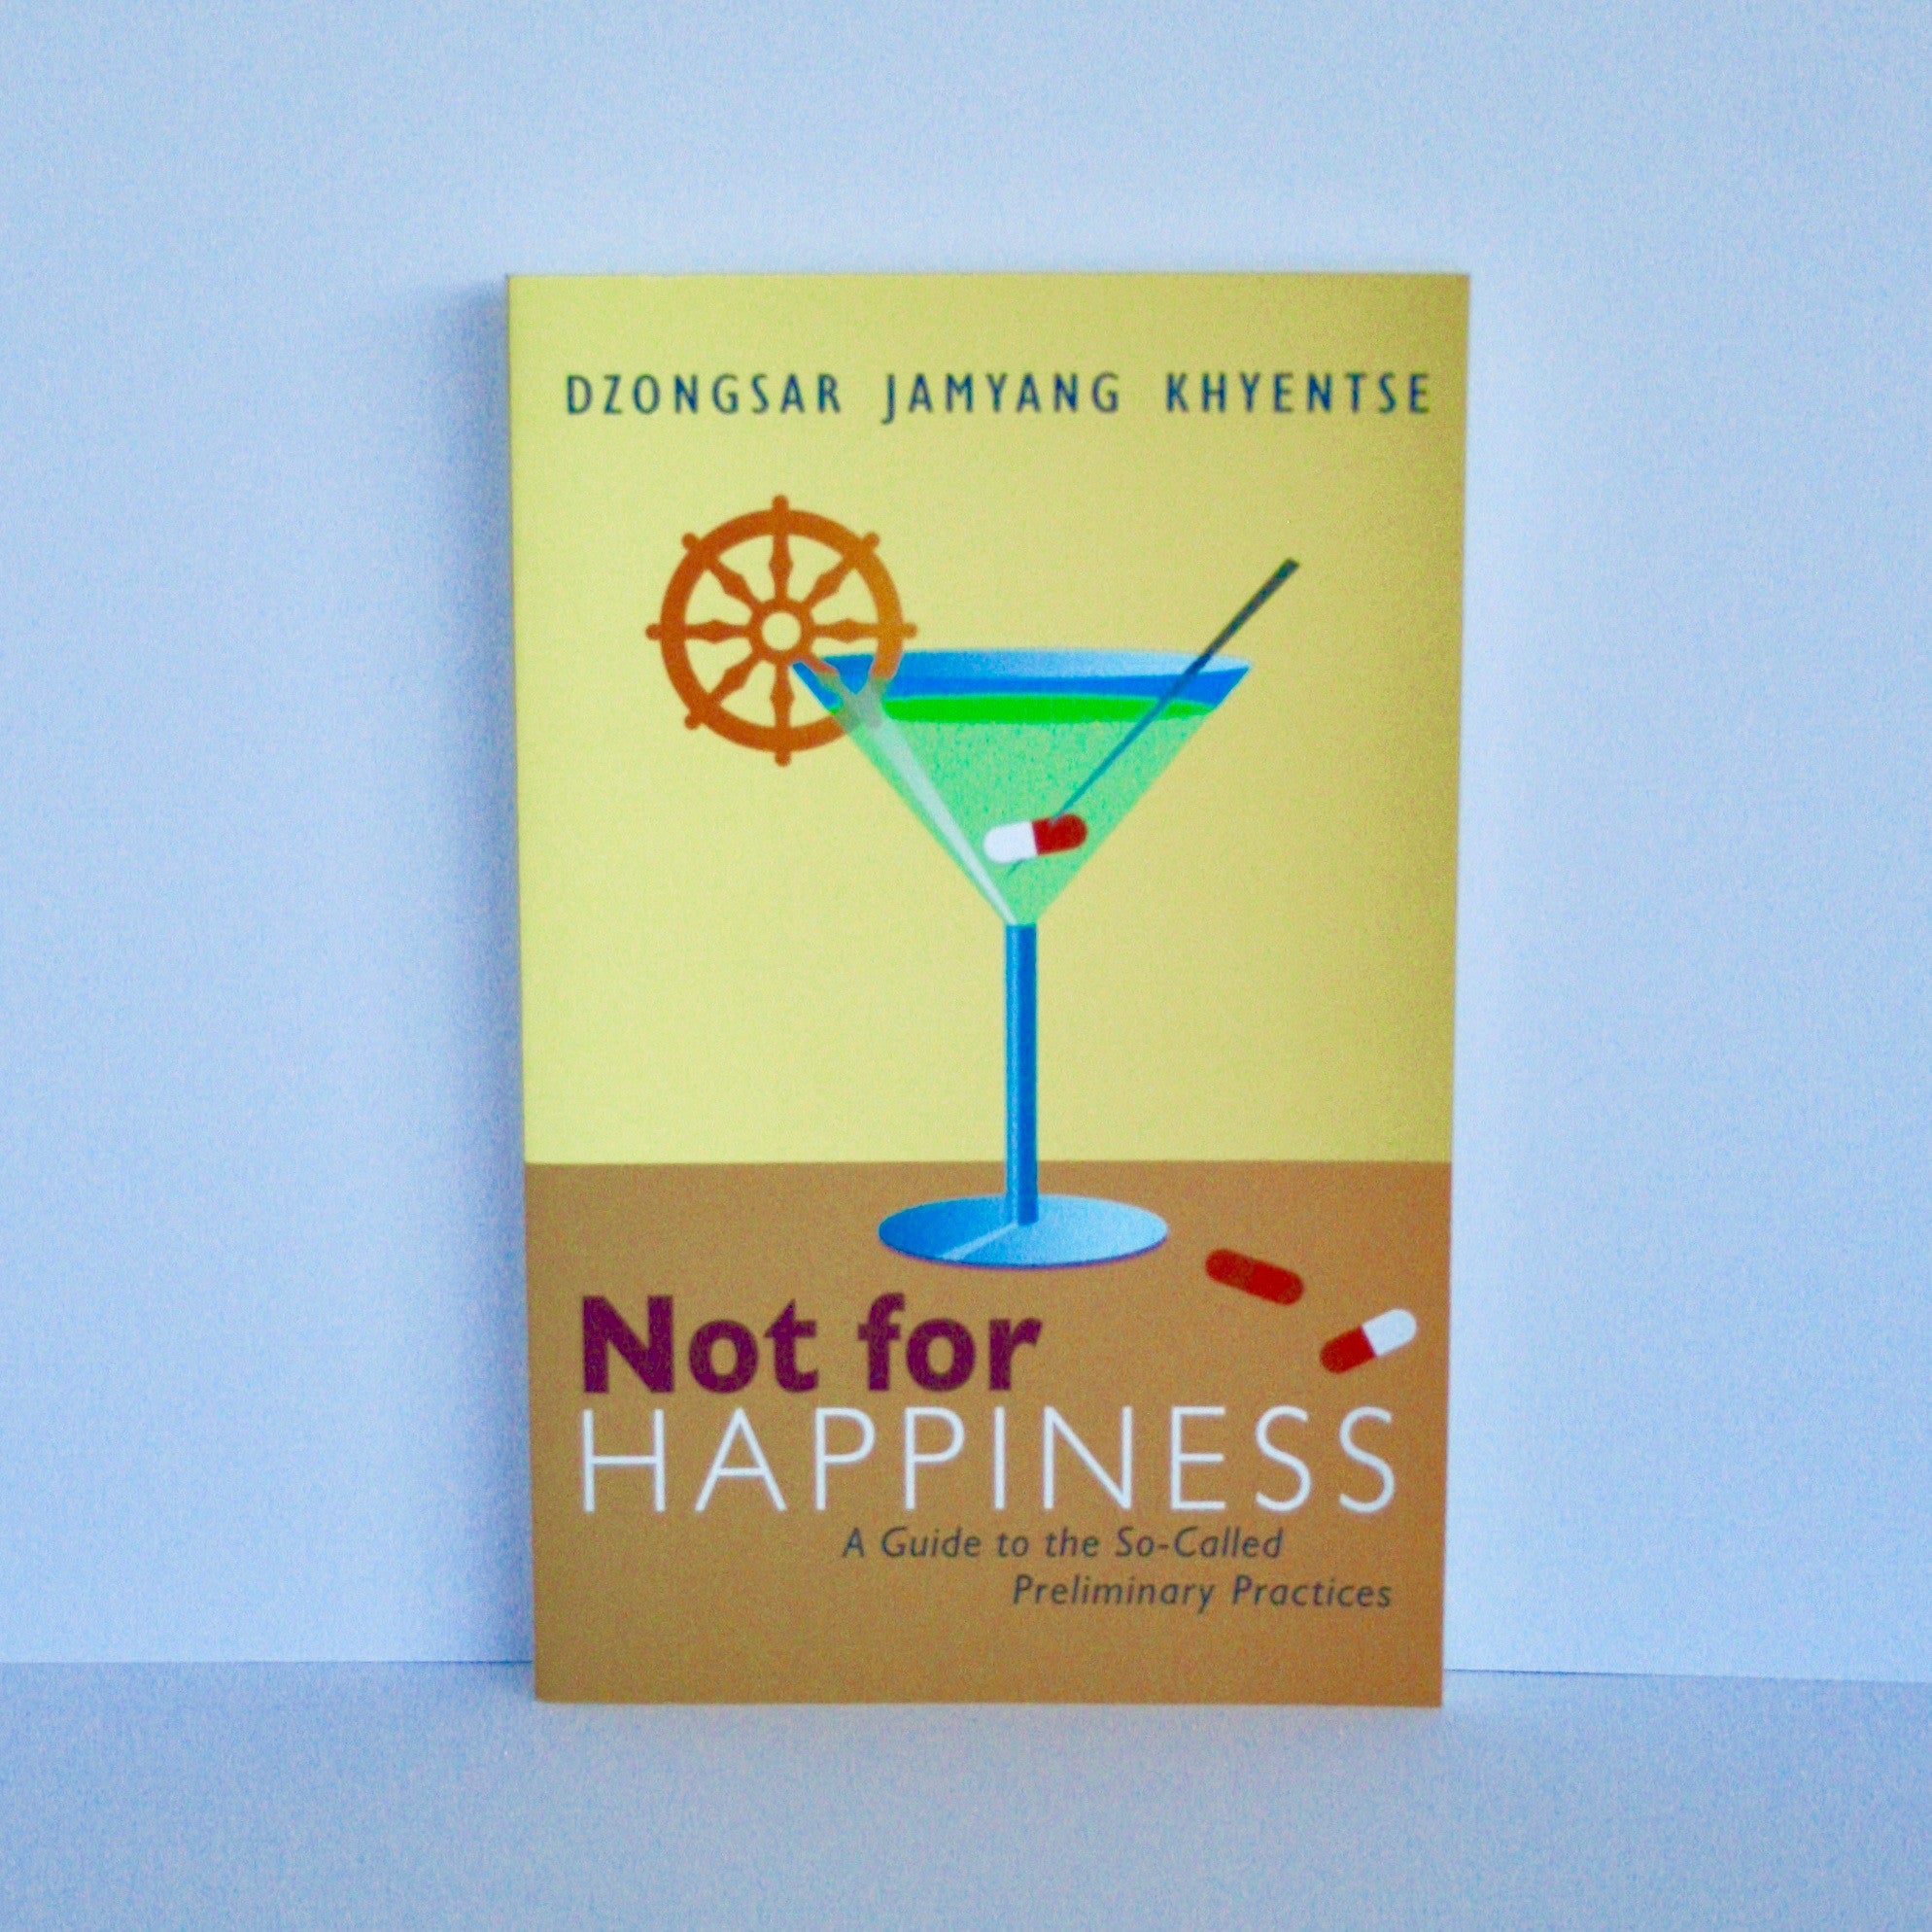 Not for Happiness - A Guide to the So-Called Preliminary Practices by Dzongsar Jamyang Khyentse